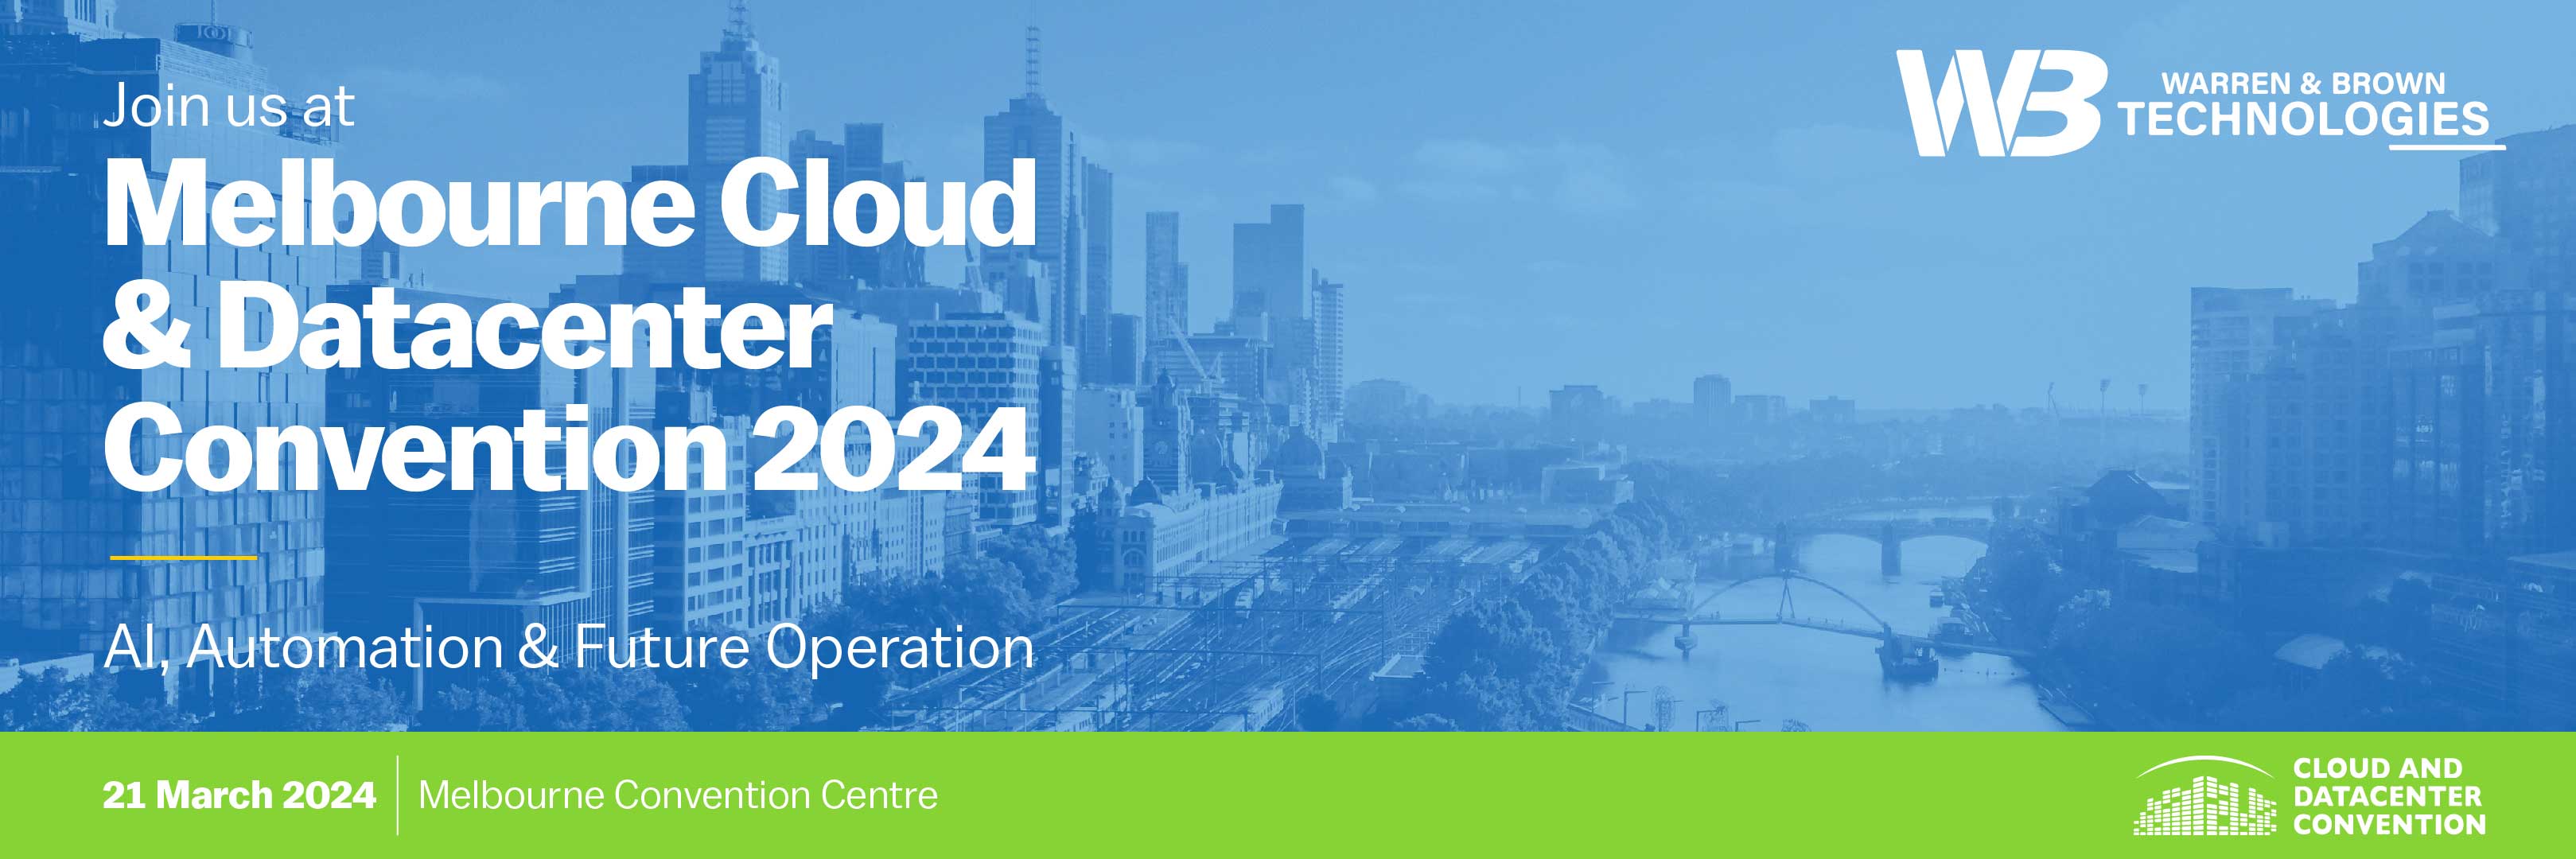  Discover the Future of Cloud and Data Centers with Warren and Brown at W.Media Melbourne Convention 2024